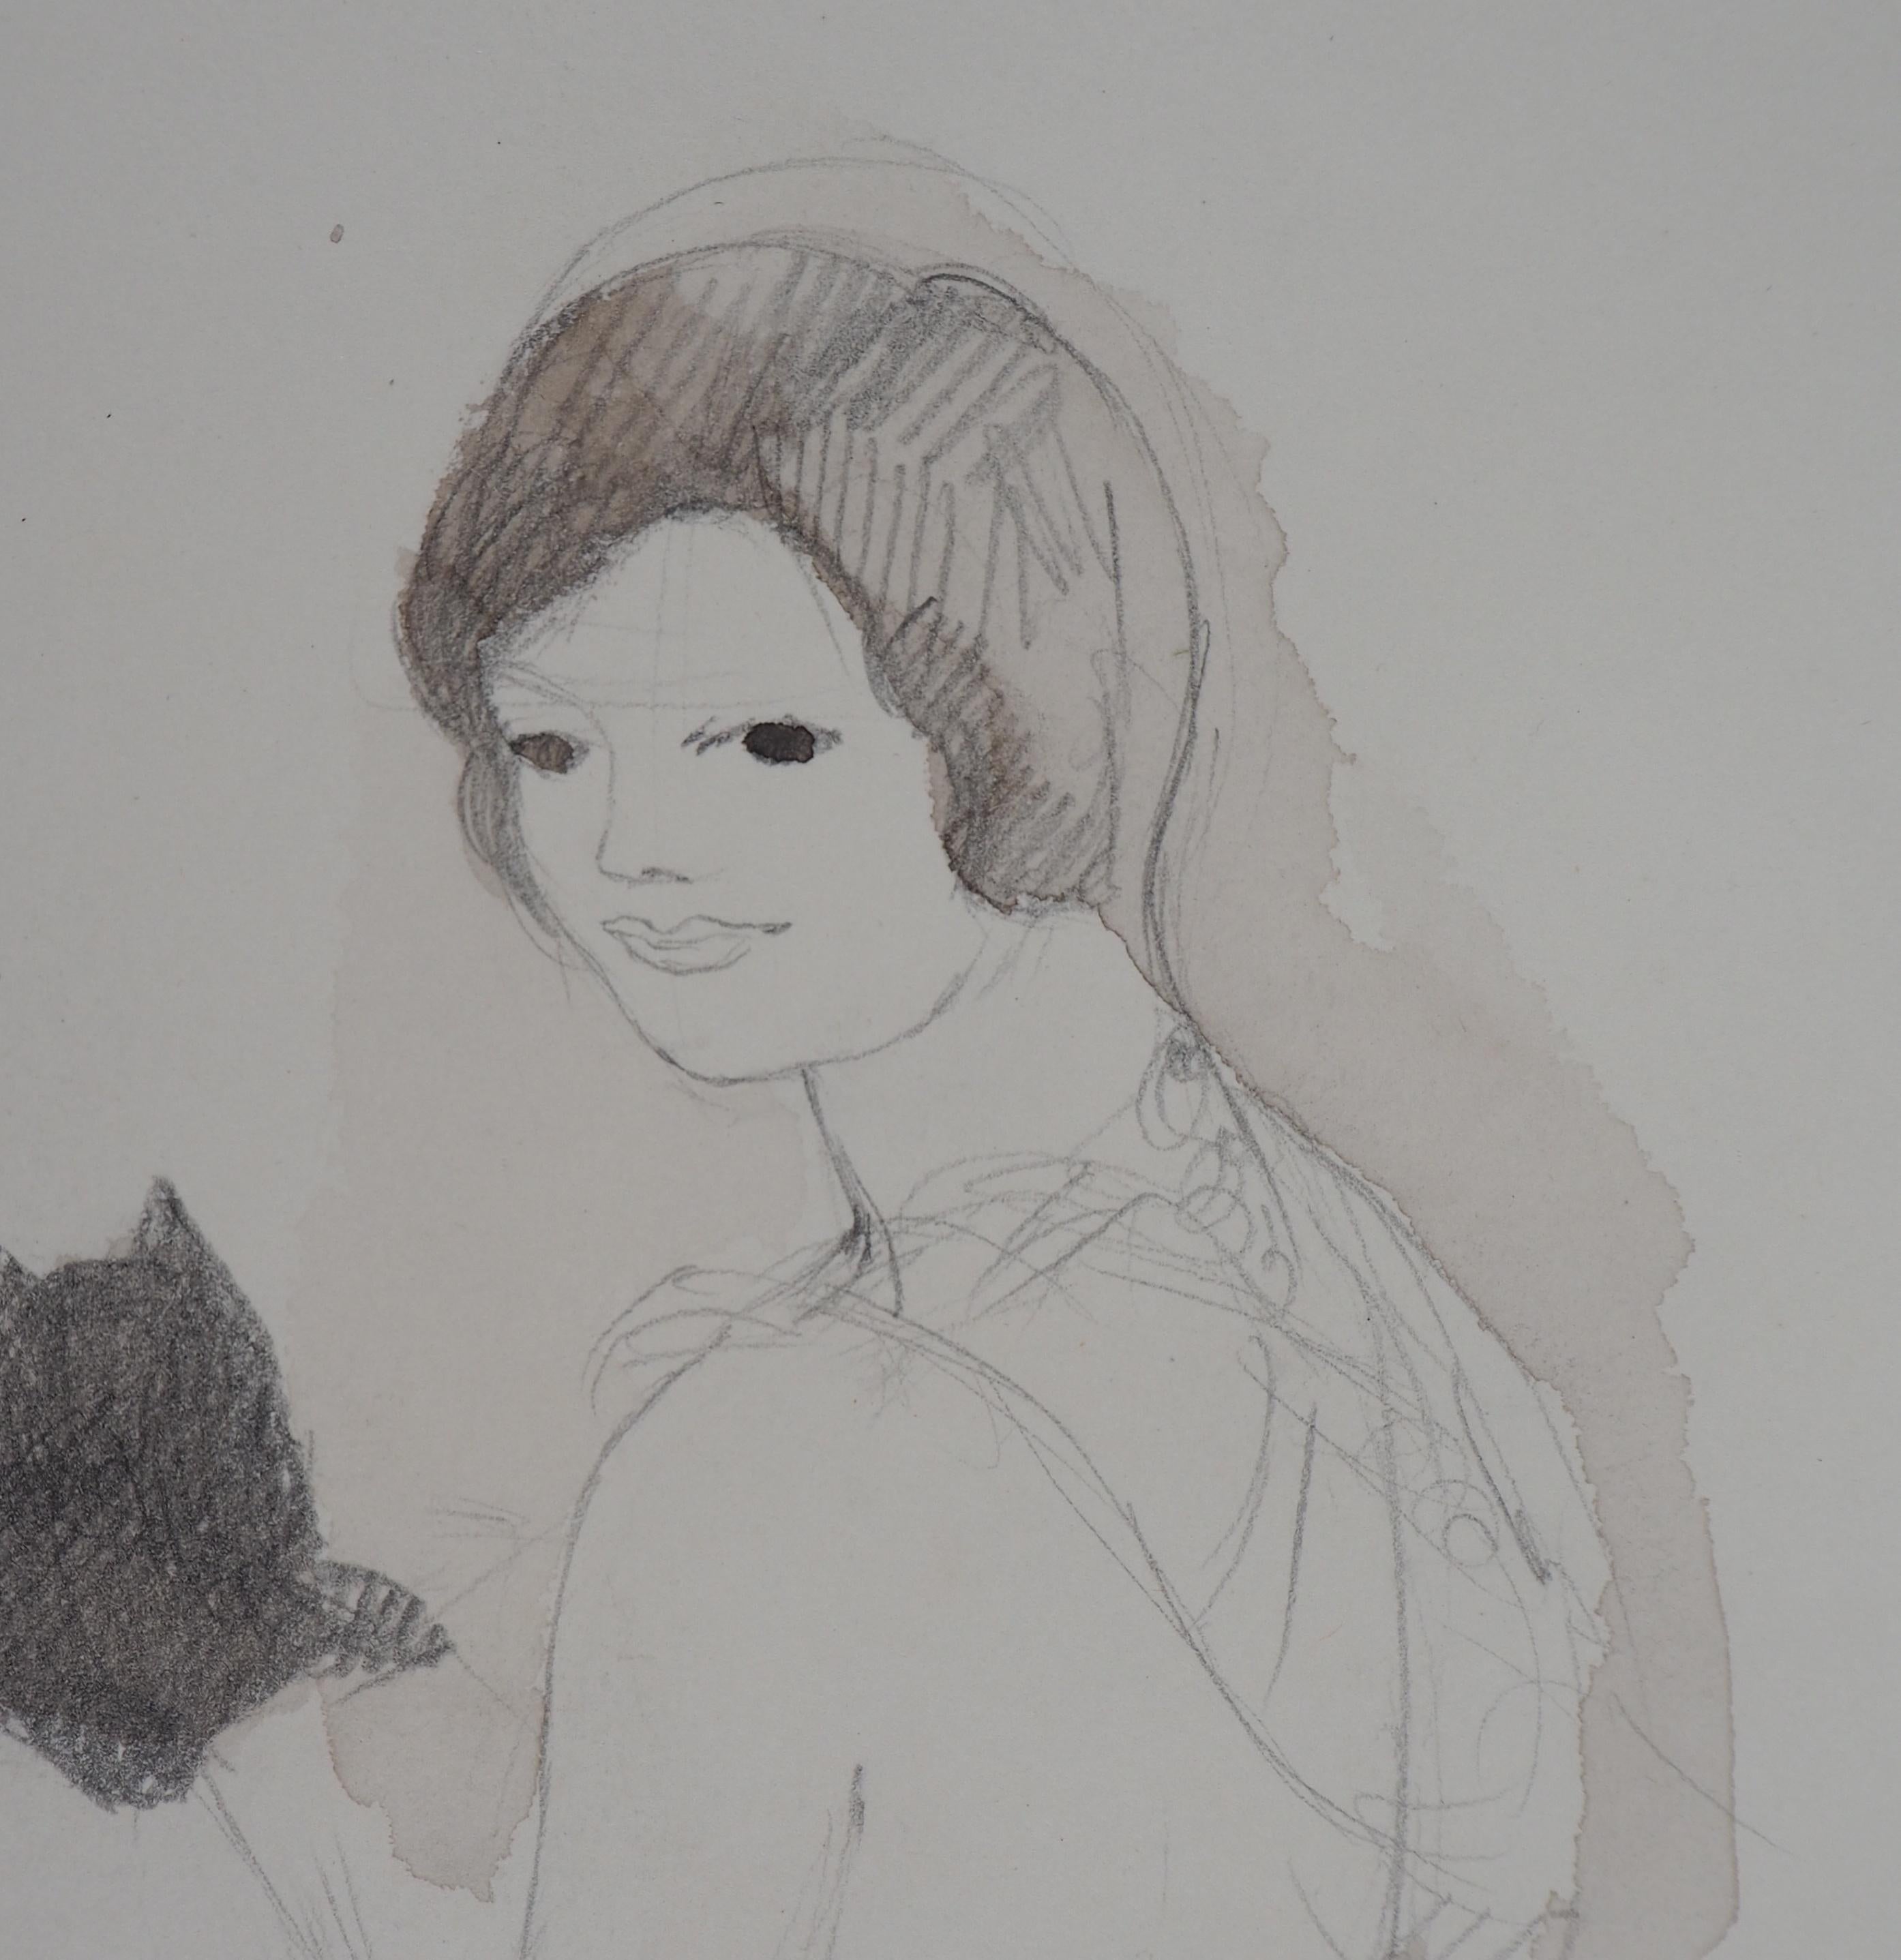 Young Girl with Kitten - Original watercolor drawing - Handsigned - Realist Art by Marie Laurencin